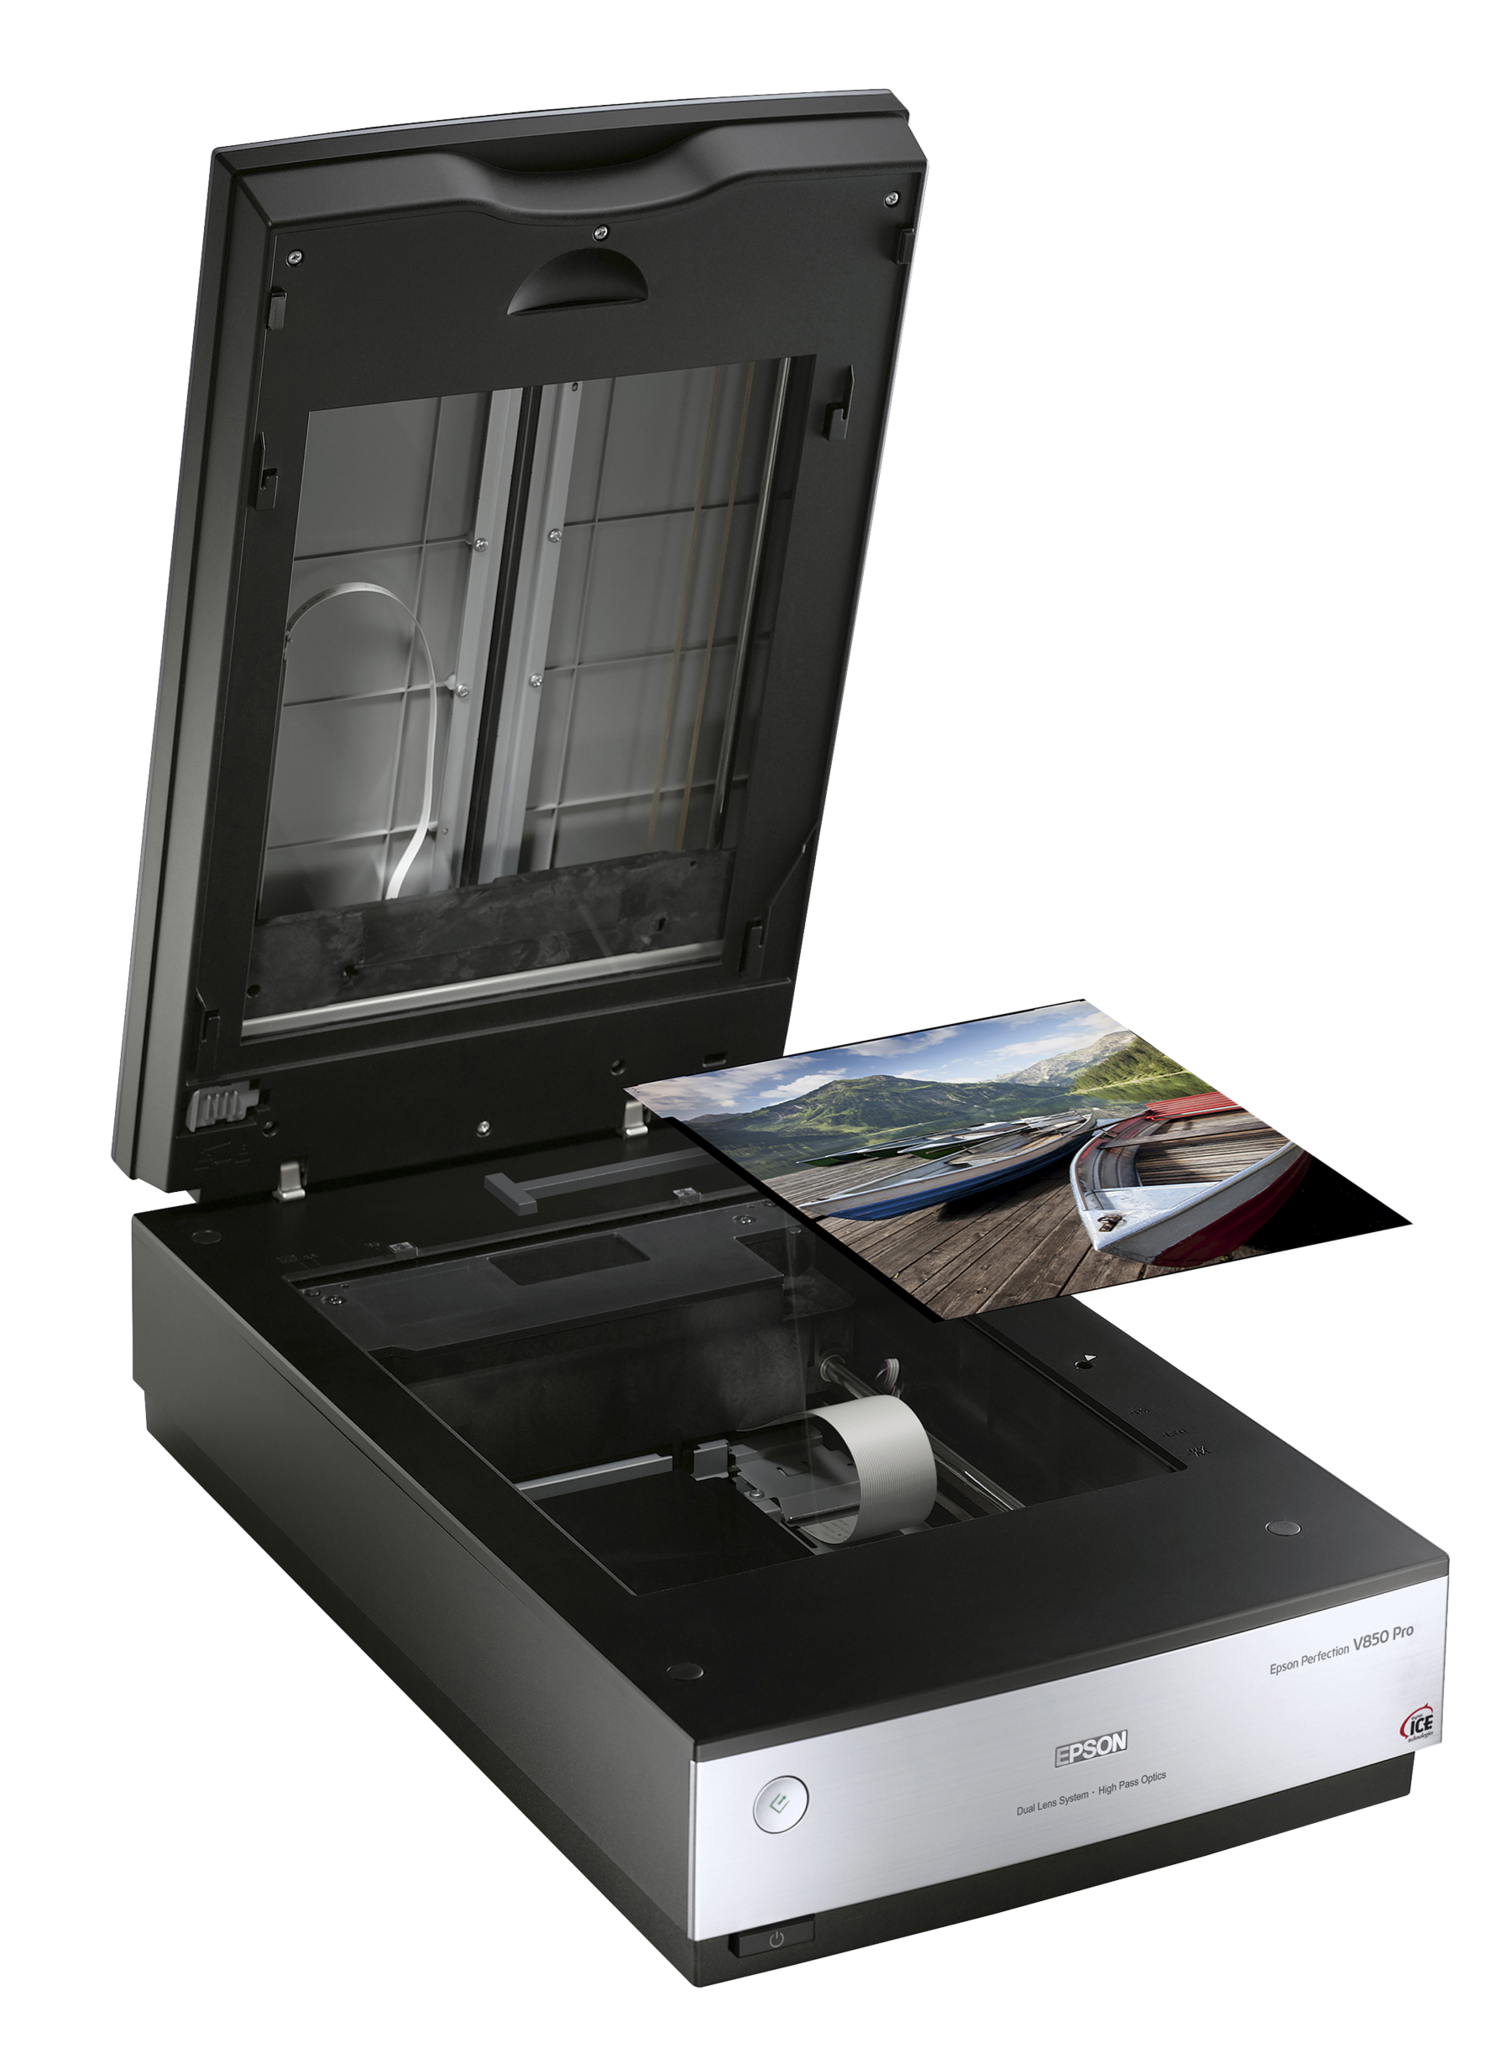 Epson Perfection V850 Pro Photo Scanner, computers flatbed scanners, Epson - Pictureline  - 5